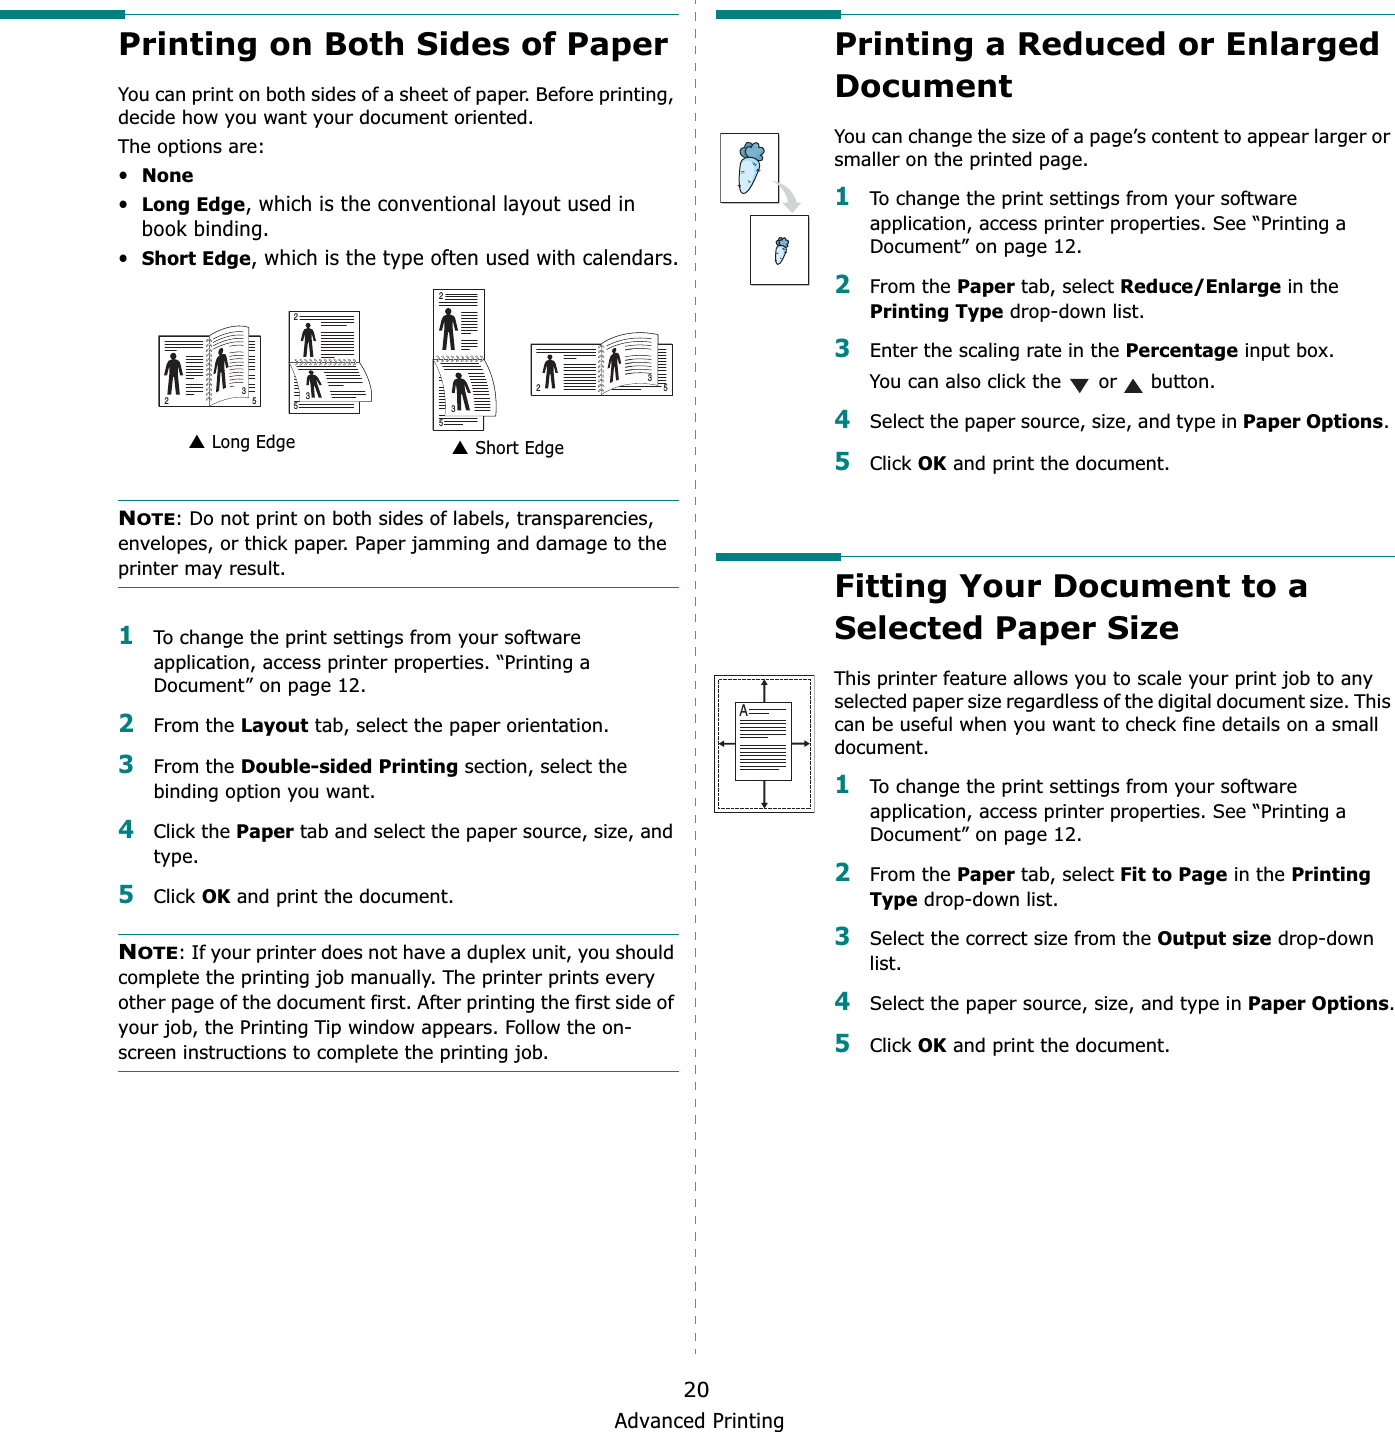 Advanced Printing20Printing on Both Sides of PaperYou can print on both sides of a sheet of paper. Before printing, decide how you want your document oriented.The options are:•None•Long Edge, which is the conventional layout used in book binding.•Short Edge, which is the type often used with calendars.NOTE: Do not print on both sides of labels, transparencies, envelopes, or thick paper. Paper jamming and damage to the printer may result. 1To change the print settings from your software application, access printer properties. “Printing a Document” on page 12.2From the Layout tab, select the paper orientation.3From the Double-sided Printing section, select the binding option you want.     4Click the Paper tab and select the paper source, size, and type.5Click OK and print the document.NOTE: If your printer does not have a duplex unit, you should complete the printing job manually. The printer prints every other page of the document first. After printing the first side of your job, the Printing Tip window appears. Follow the on-screen instructions to complete the printing job. Long Edge▲ Short Edge▲253253253253Printing a Reduced or Enlarged DocumentYou can change the size of a page’s content to appear larger or smaller on the printed page. 1To change the print settings from your software application, access printer properties. See “Printing a Document” on page 12. 2From the Paper tab, select Reduce/Enlarge in the Printing Type drop-down list. 3Enter the scaling rate in the Percentage input box.You can also click the   or   button.4Select the paper source, size, and type in Paper Options.5Click OK and print the document. Fitting Your Document to a Selected Paper SizeThis printer feature allows you to scale your print job to any selected paper size regardless of the digital document size. This can be useful when you want to check fine details on a small document. 1To change the print settings from your software application, access printer properties. See “Printing a Document” on page 12.2From the Paper tab, select Fit to Page in the Printing Type drop-down list. 3Select the correct size from the Output size drop-down list.4Select the paper source, size, and type in Paper Options.5Click OK and print the document.A